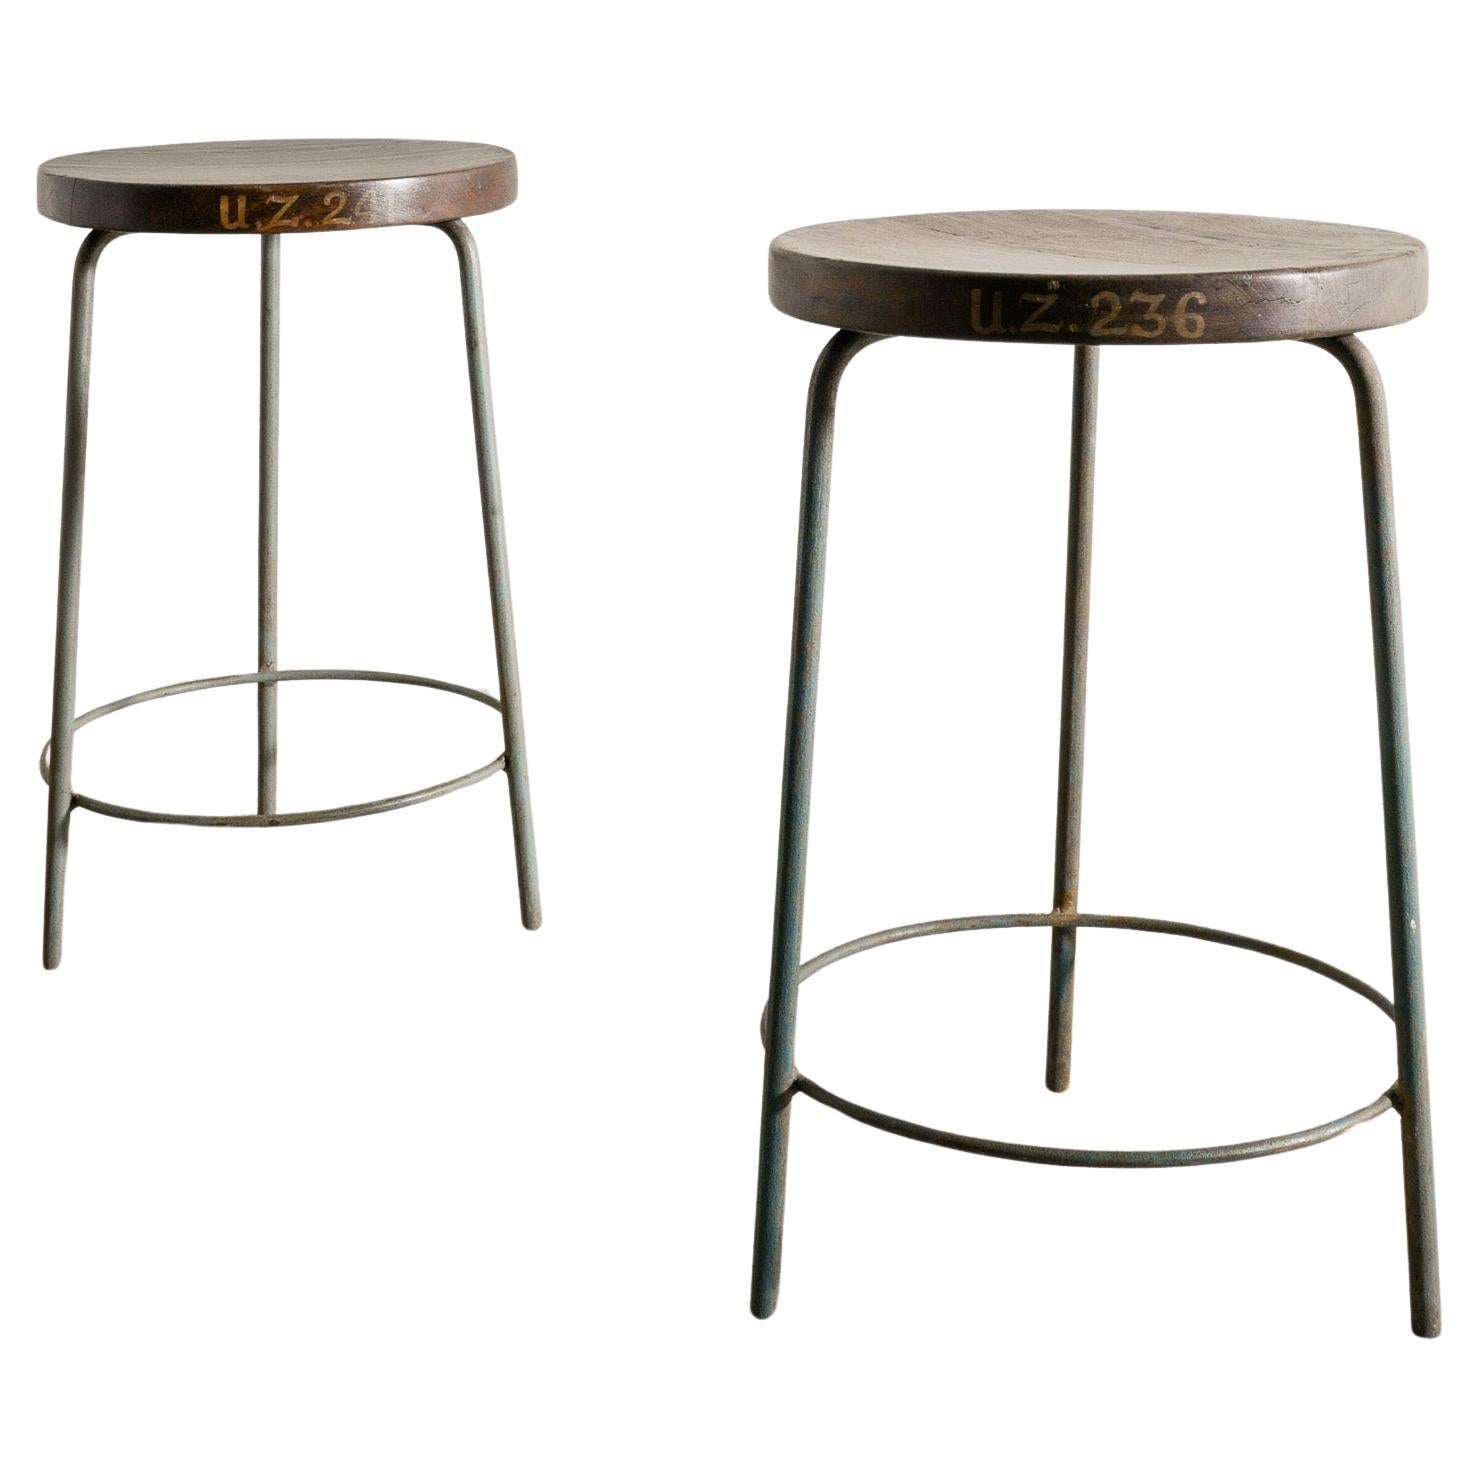 Pair of Mid Century Pierre Jeanneret High Stools in Teak & Iron Produced, 1950s